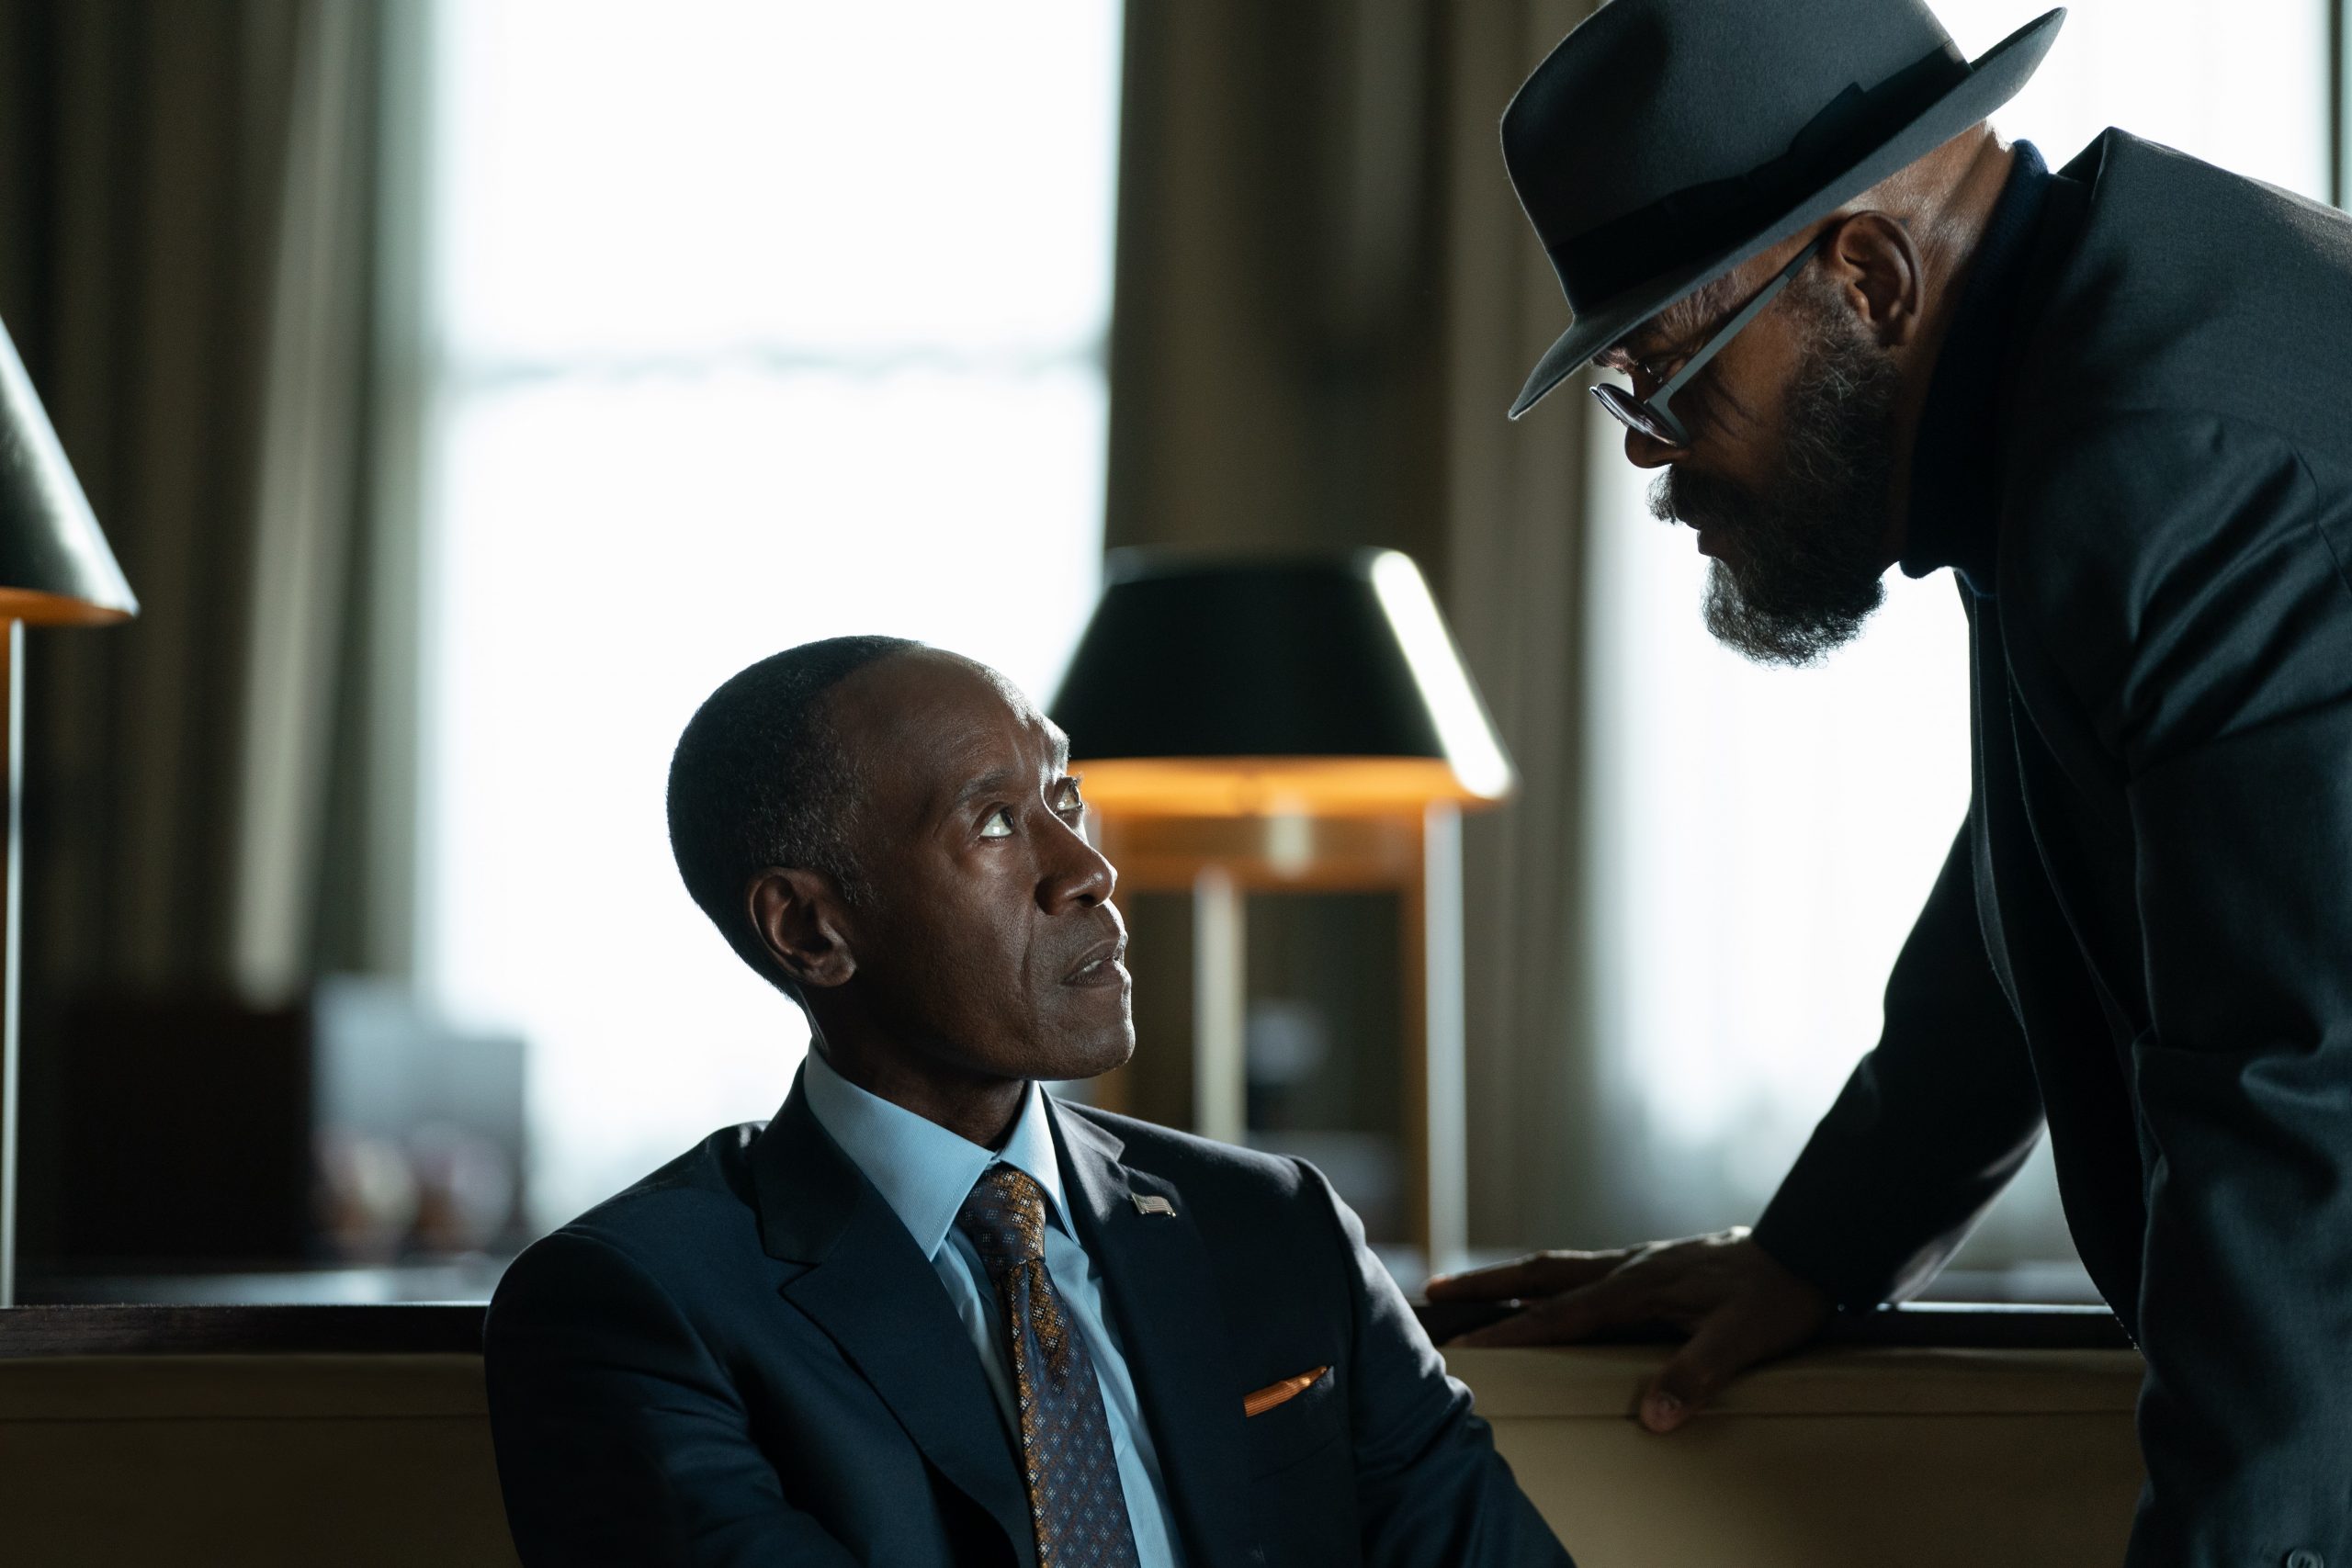 (L-R): Don Cheadle as James 'Rhodey' Rhodes and Samuel L. Jackson as Nick Fury in Marvel Studios' SECRET INVASION, exclusively on Disney+. Photo by Gareth Gatrell. © 2023 MARVEL.